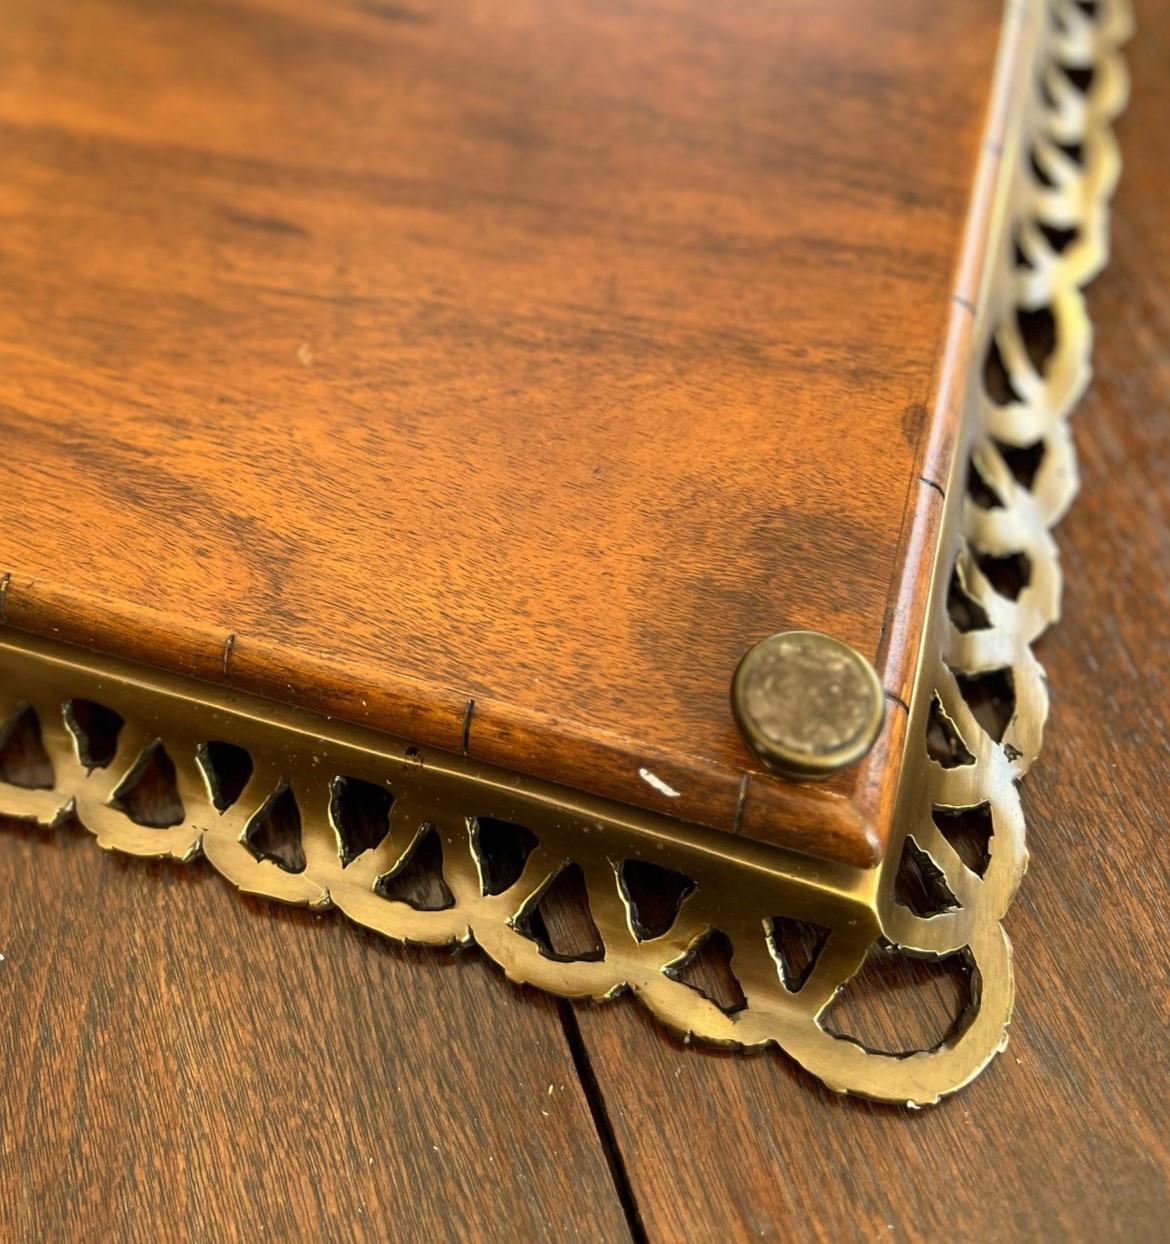 Theodore Alexander Oyster Veneer Tray With Antiqued Brass Gallery and Bun Feet For Sale 5